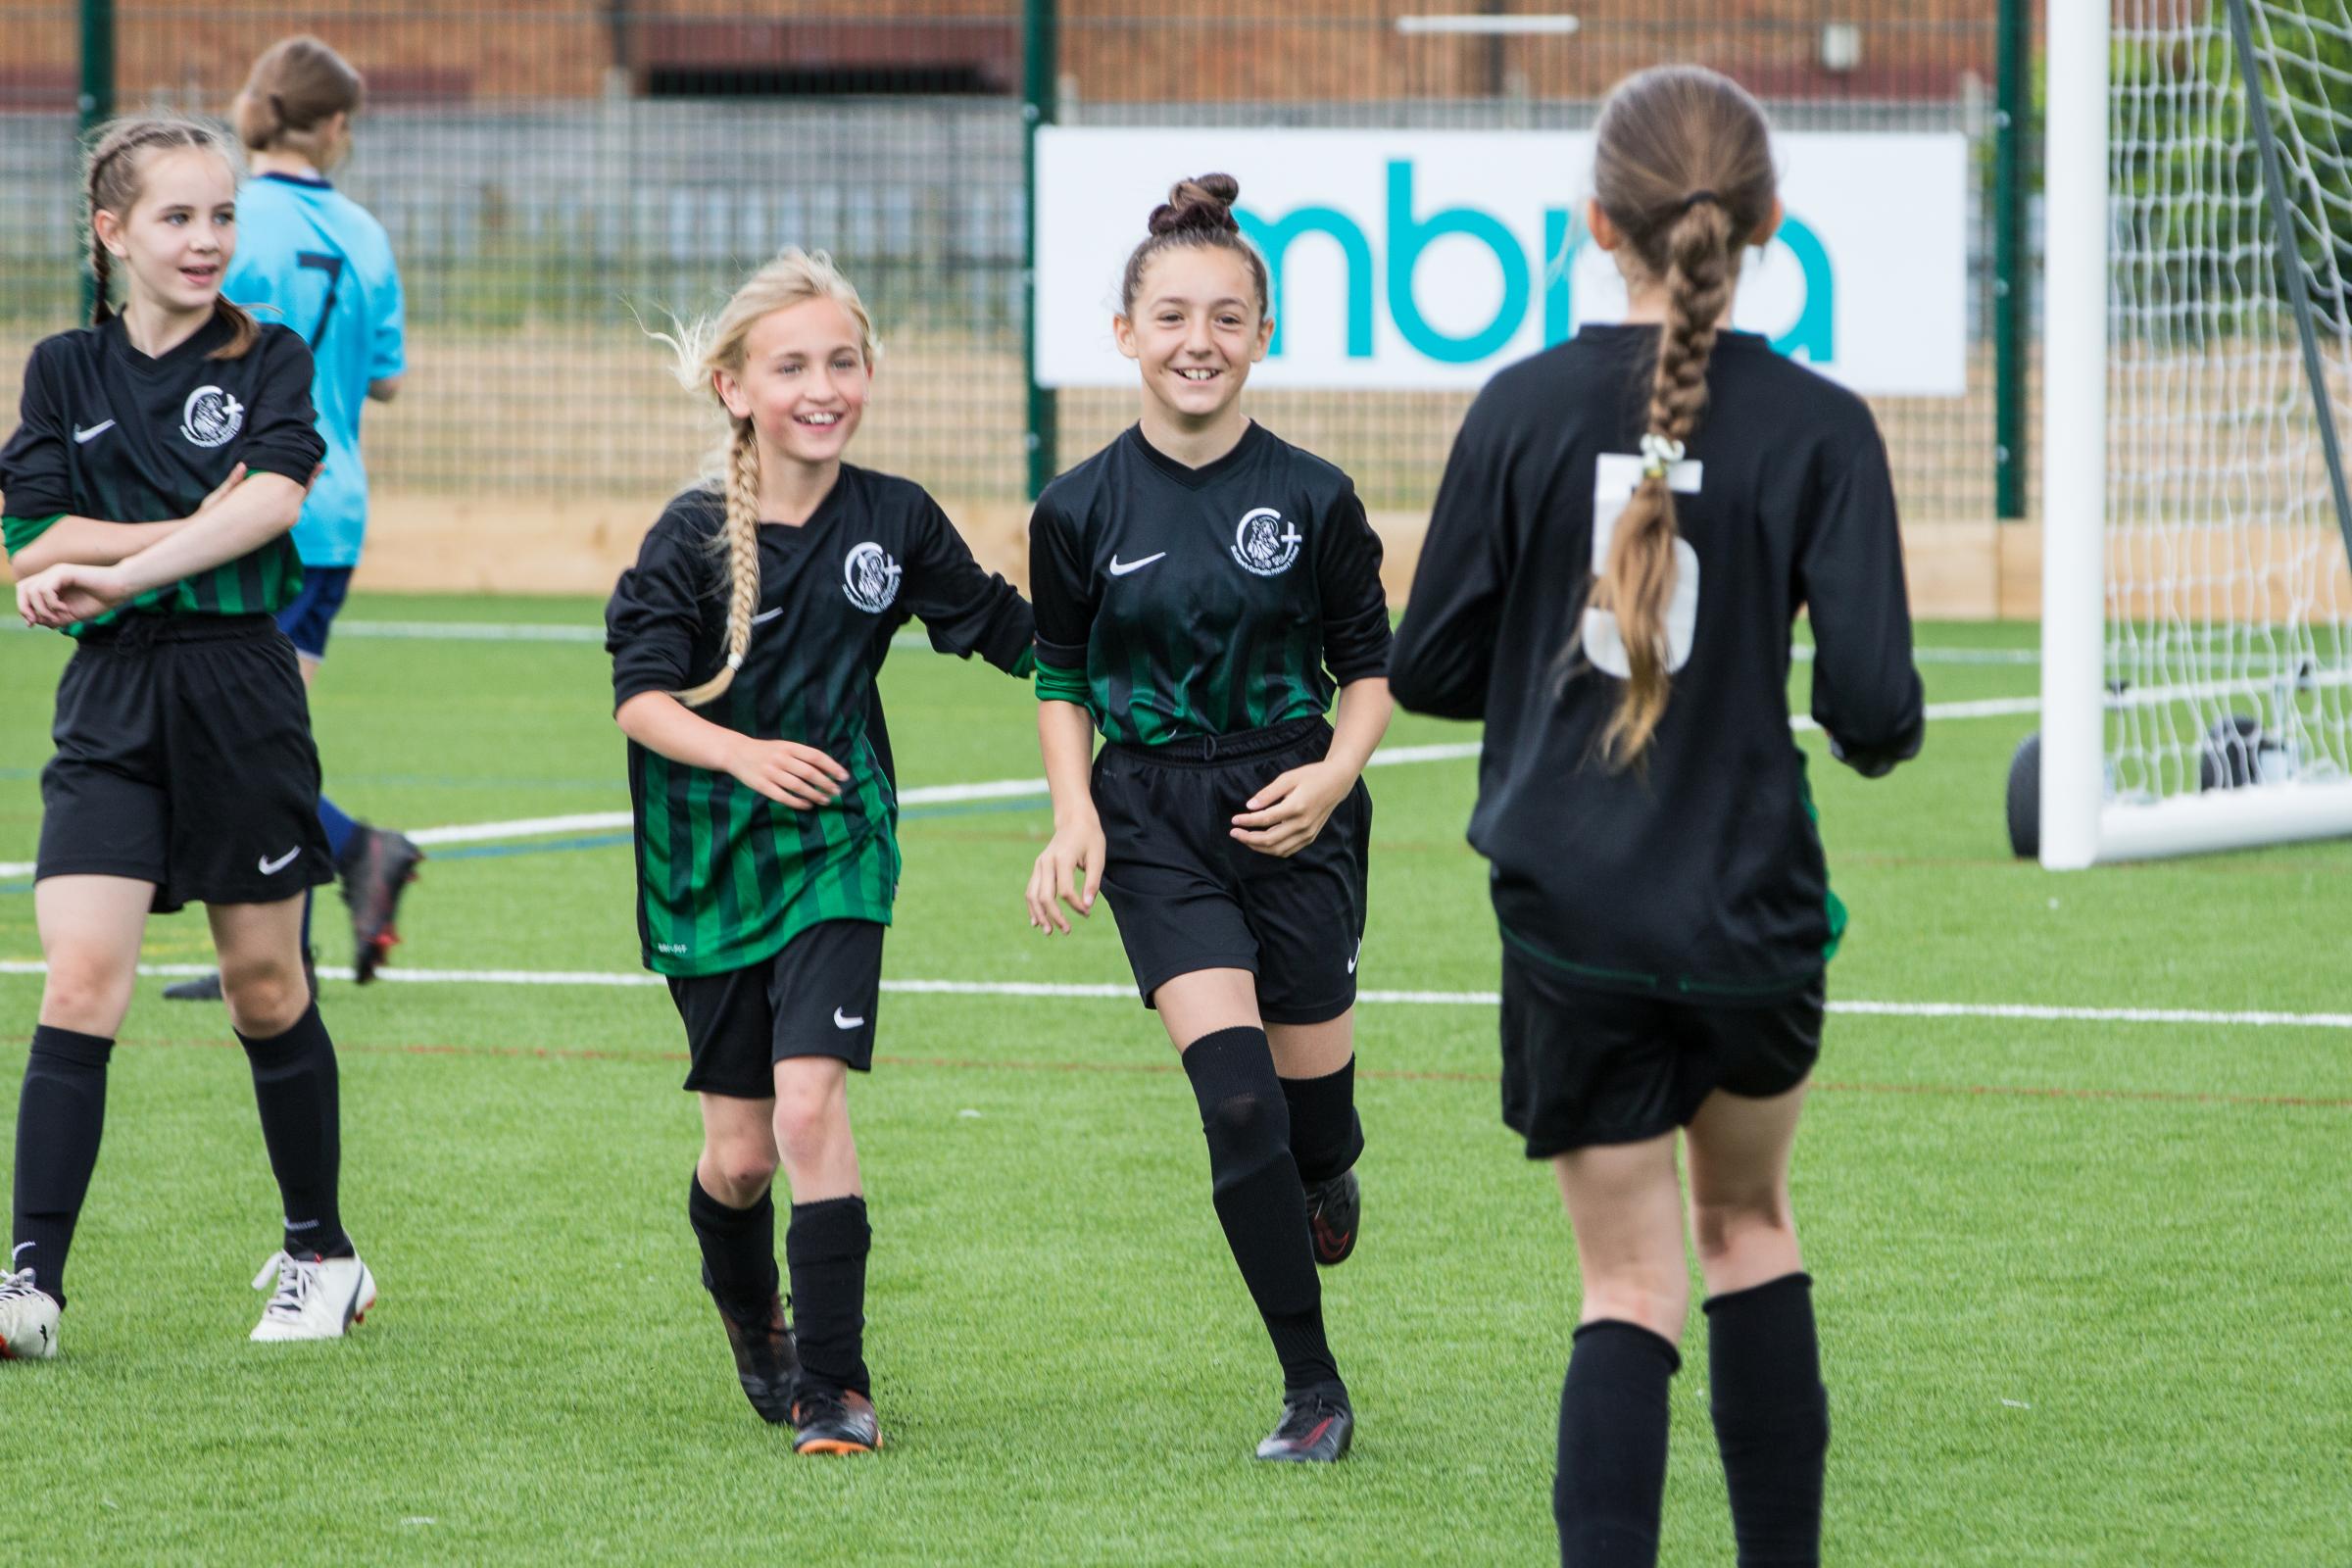 The official opening of the King George V sports hub saw children from eight Chester primary schools taking part in a girls&rsquo; football tournament on the new 3G pitch.